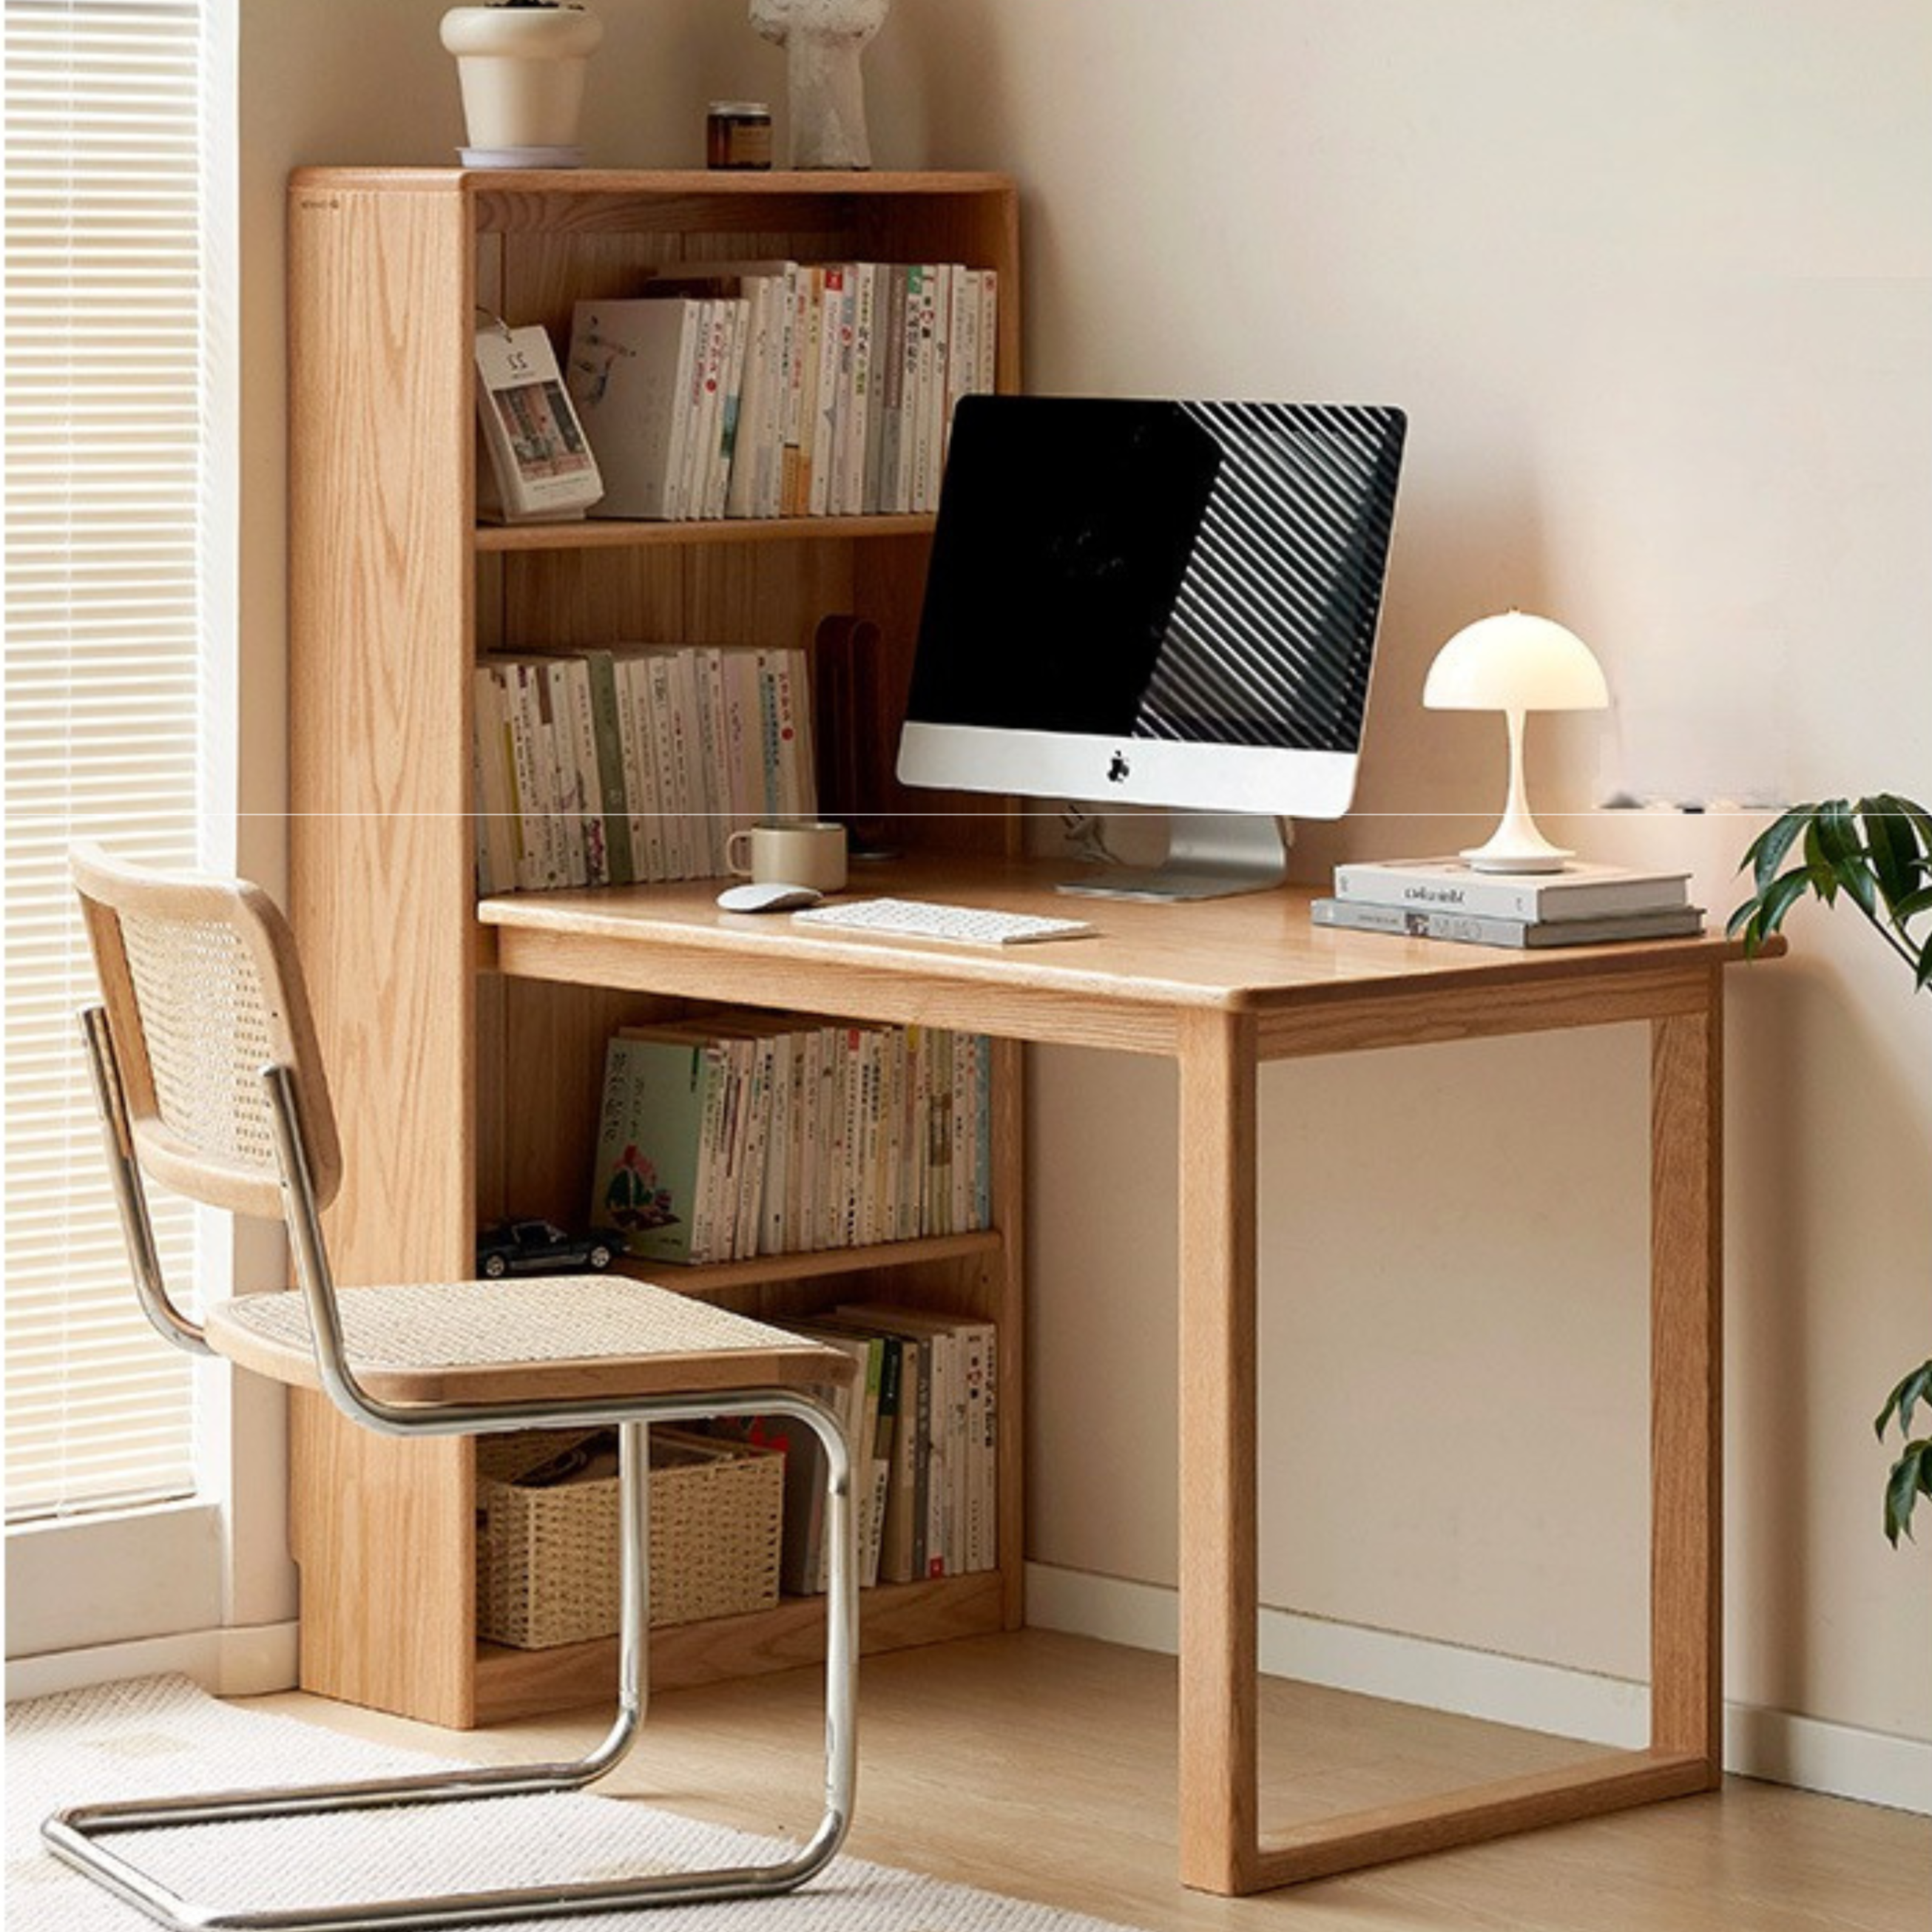 Oak solid wood desk and bookcase integrated -